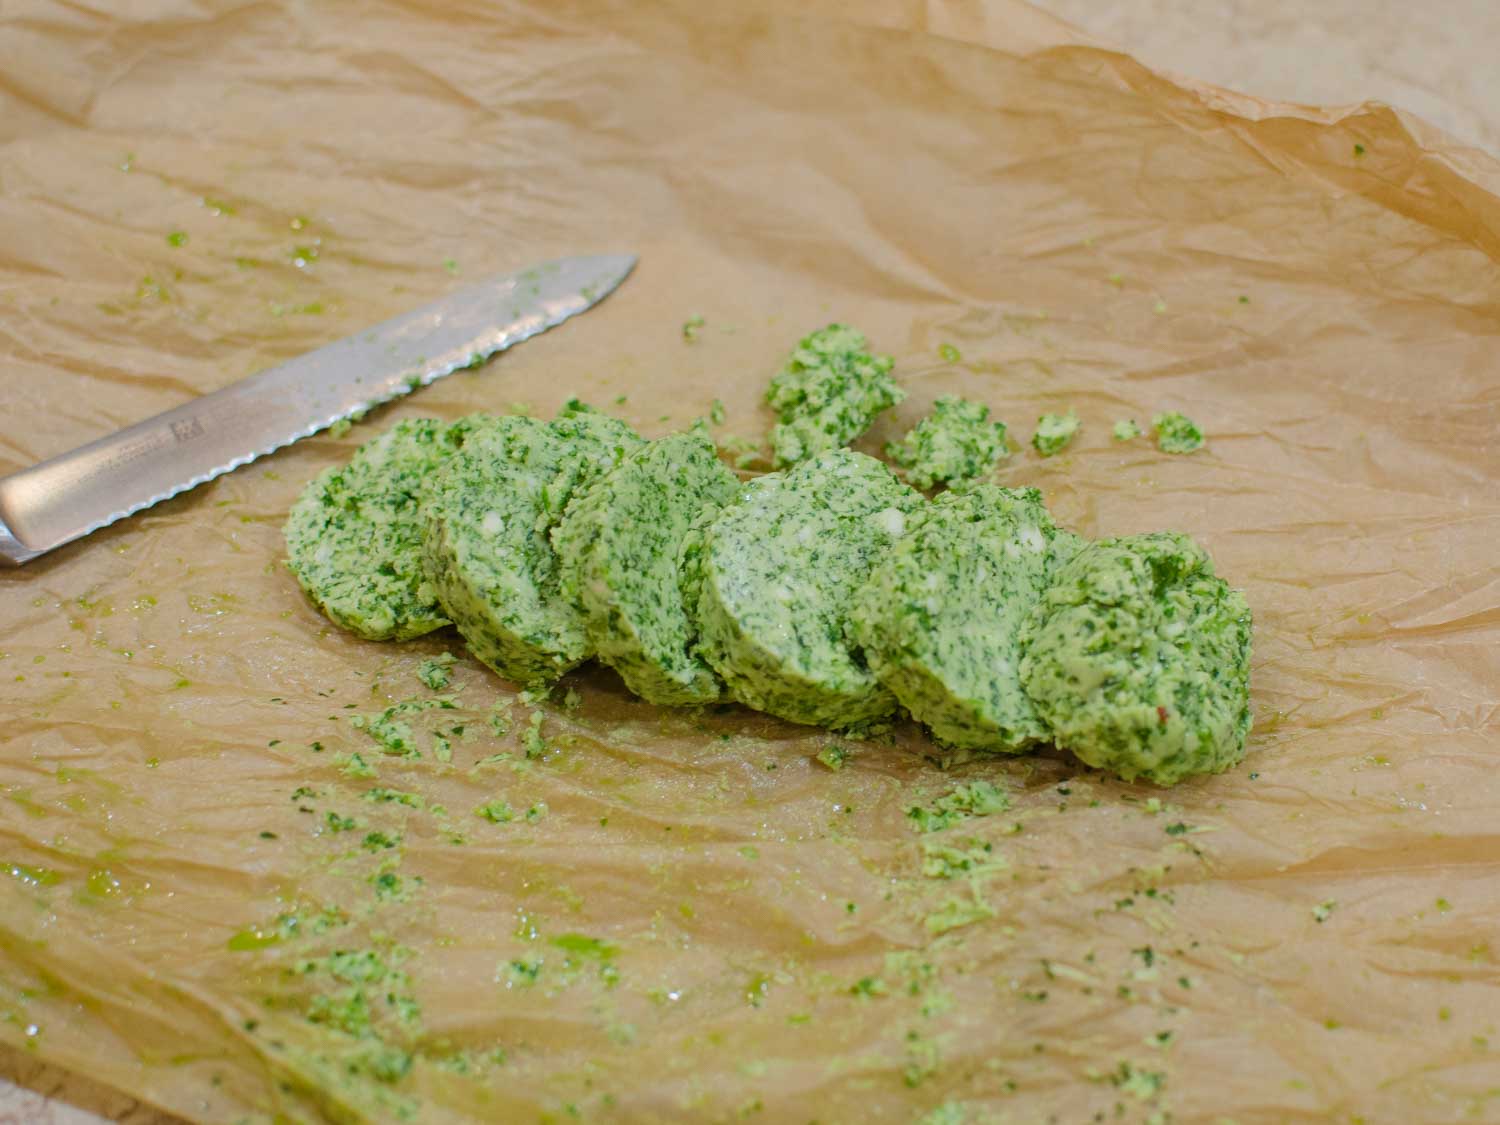 Frozen Chimichurri Butter Sliced into Discs